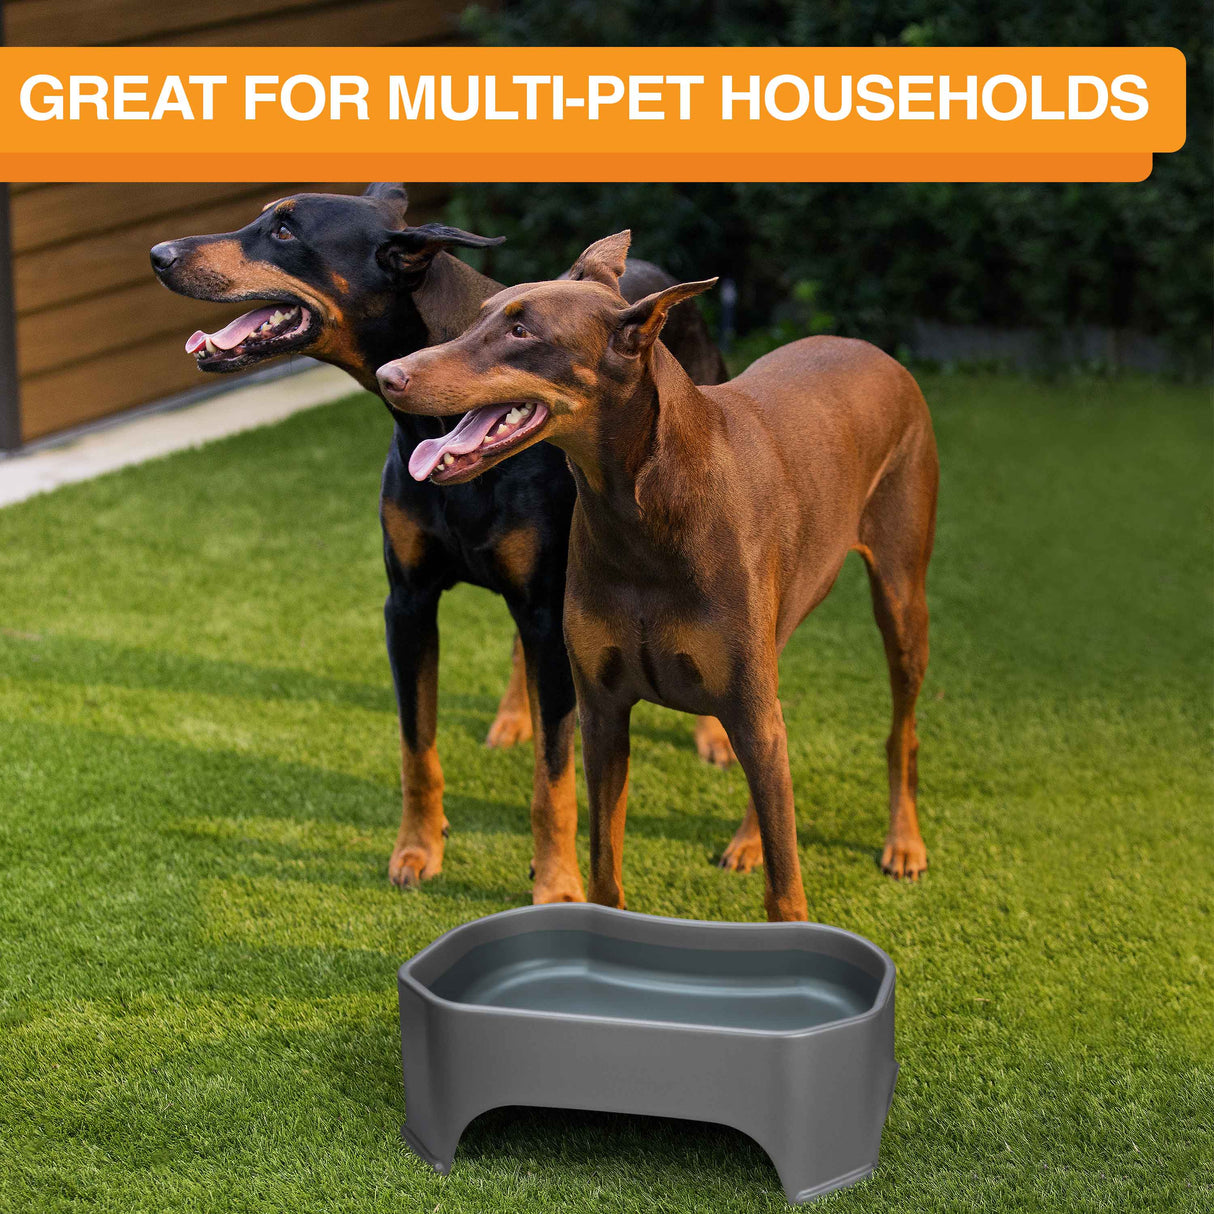 Giant bowl is great for multi-pet households